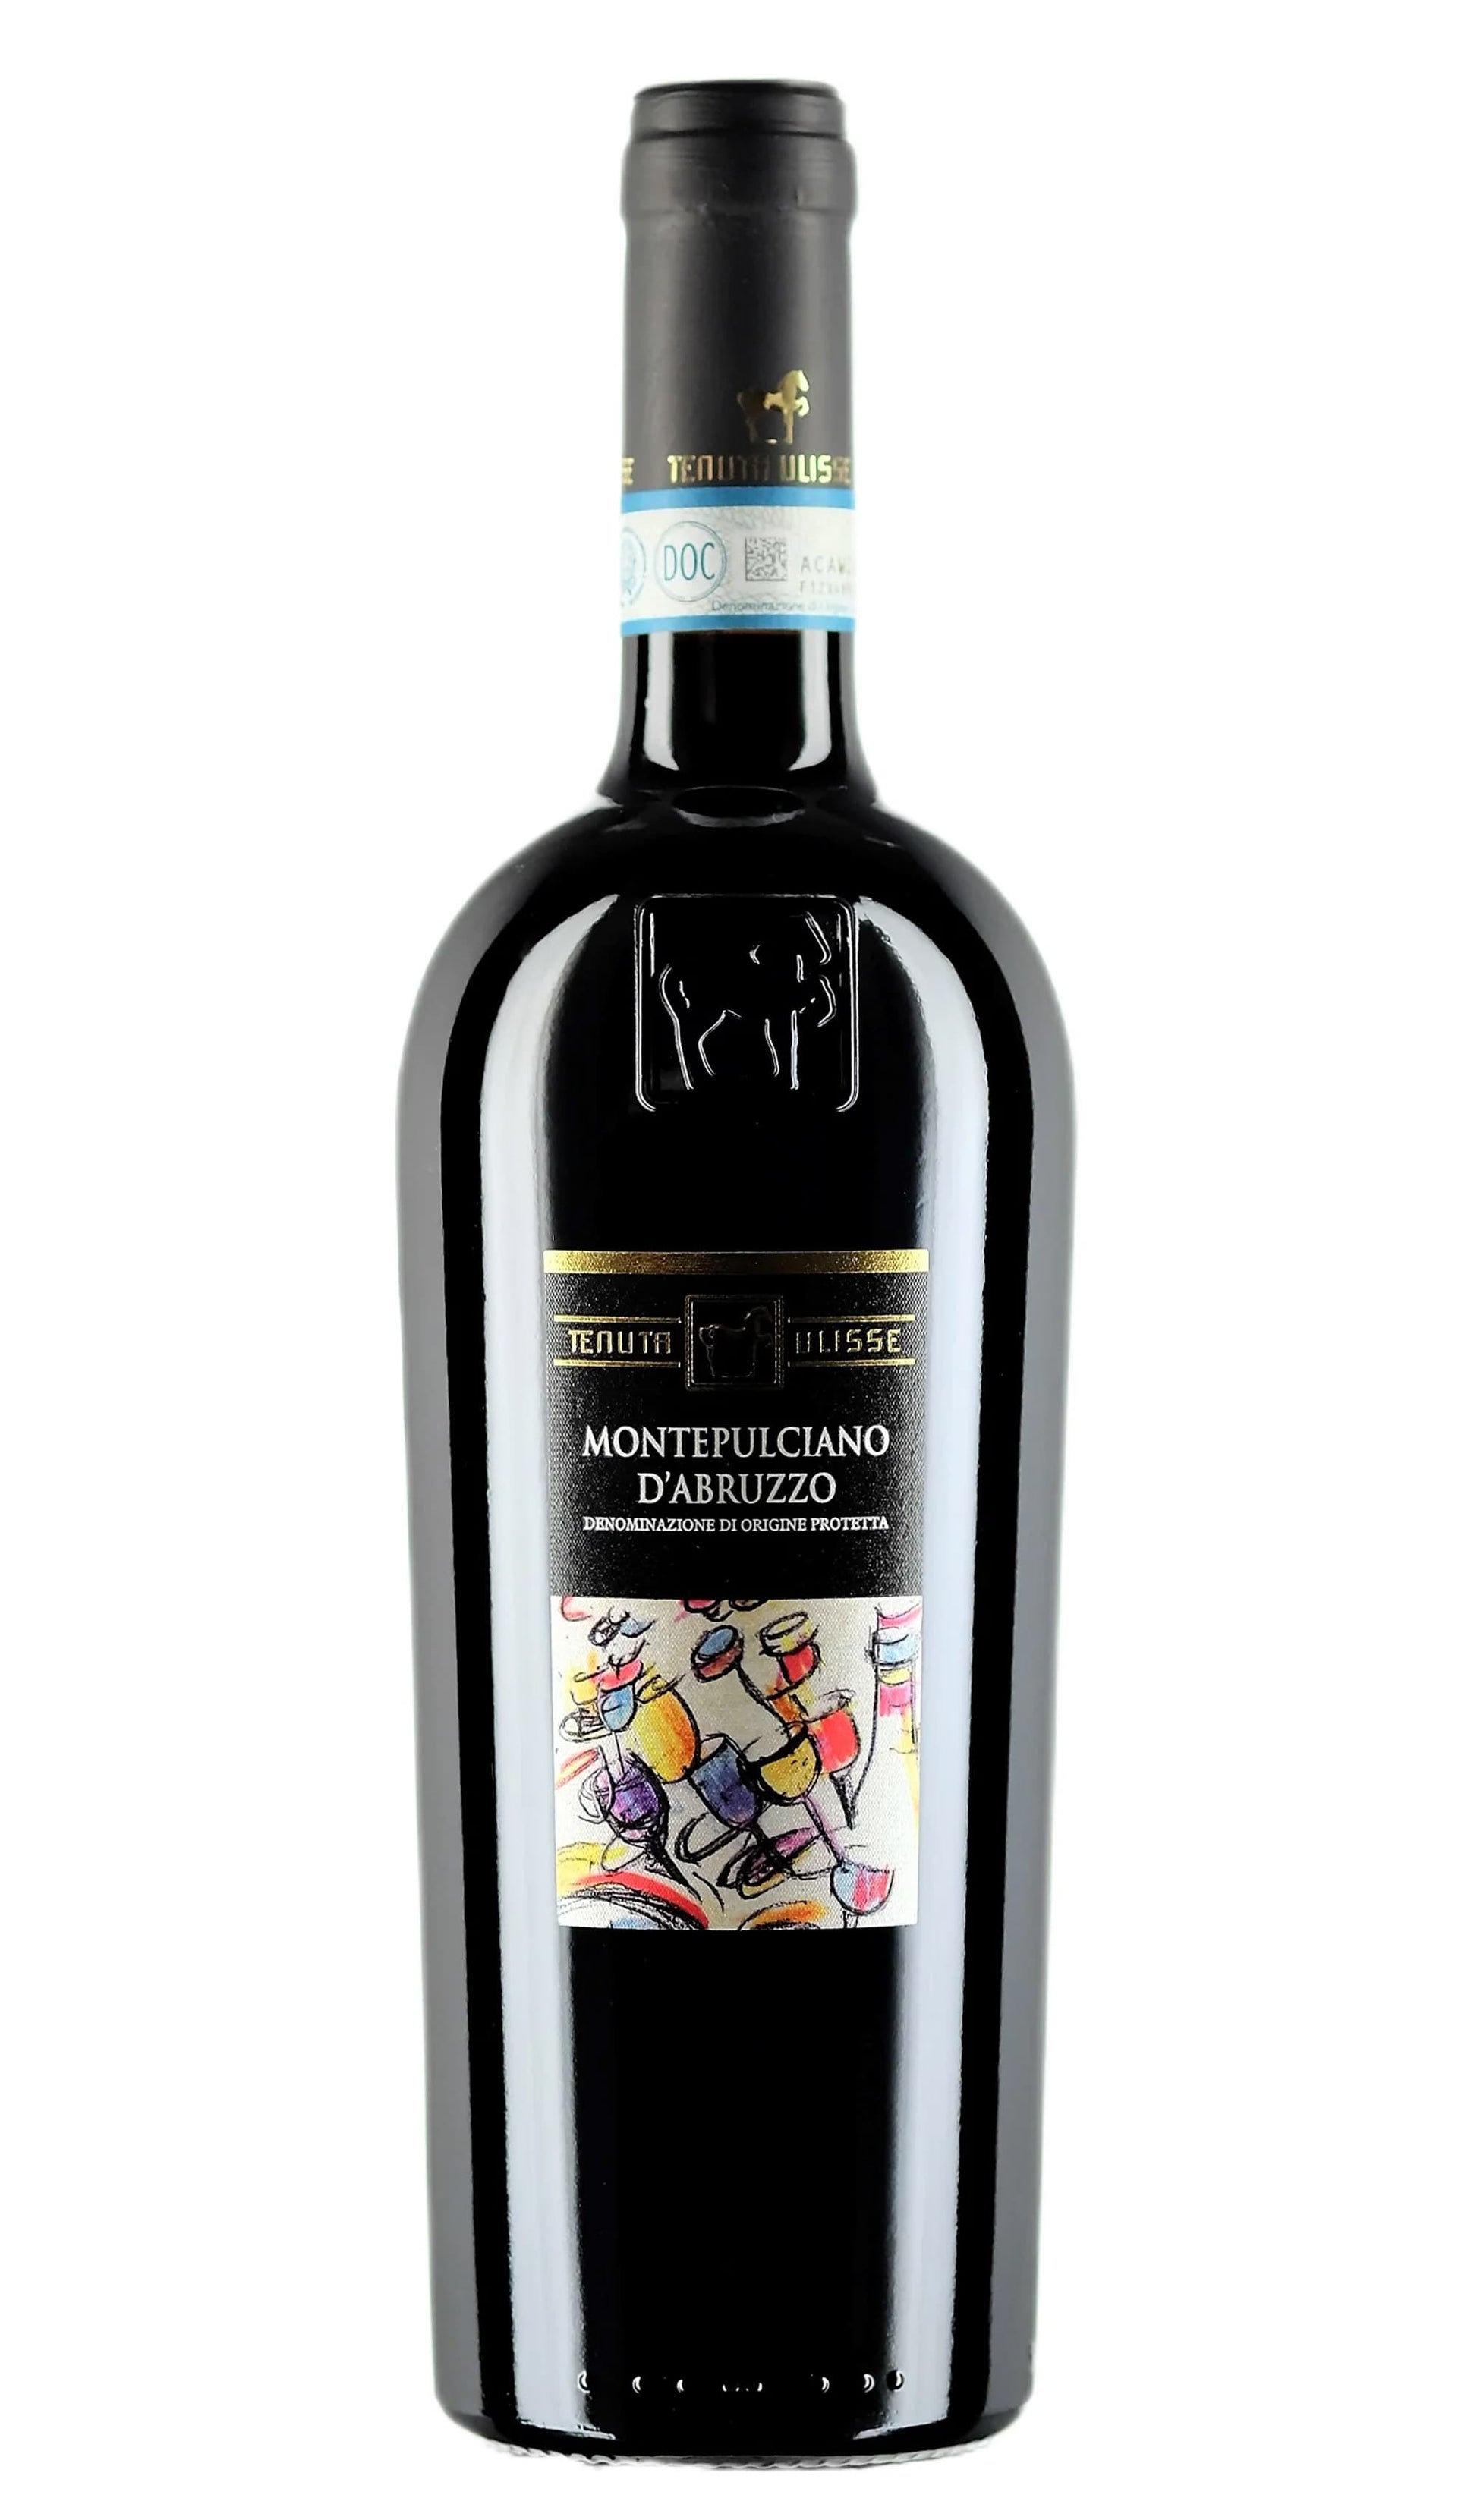 Find out more, explore the range and purchase Tenuta Ulisse Montepulciano D'Abruzzo 2021 available online at Wine Sellers Direct - Australia's independent liquor specialists.